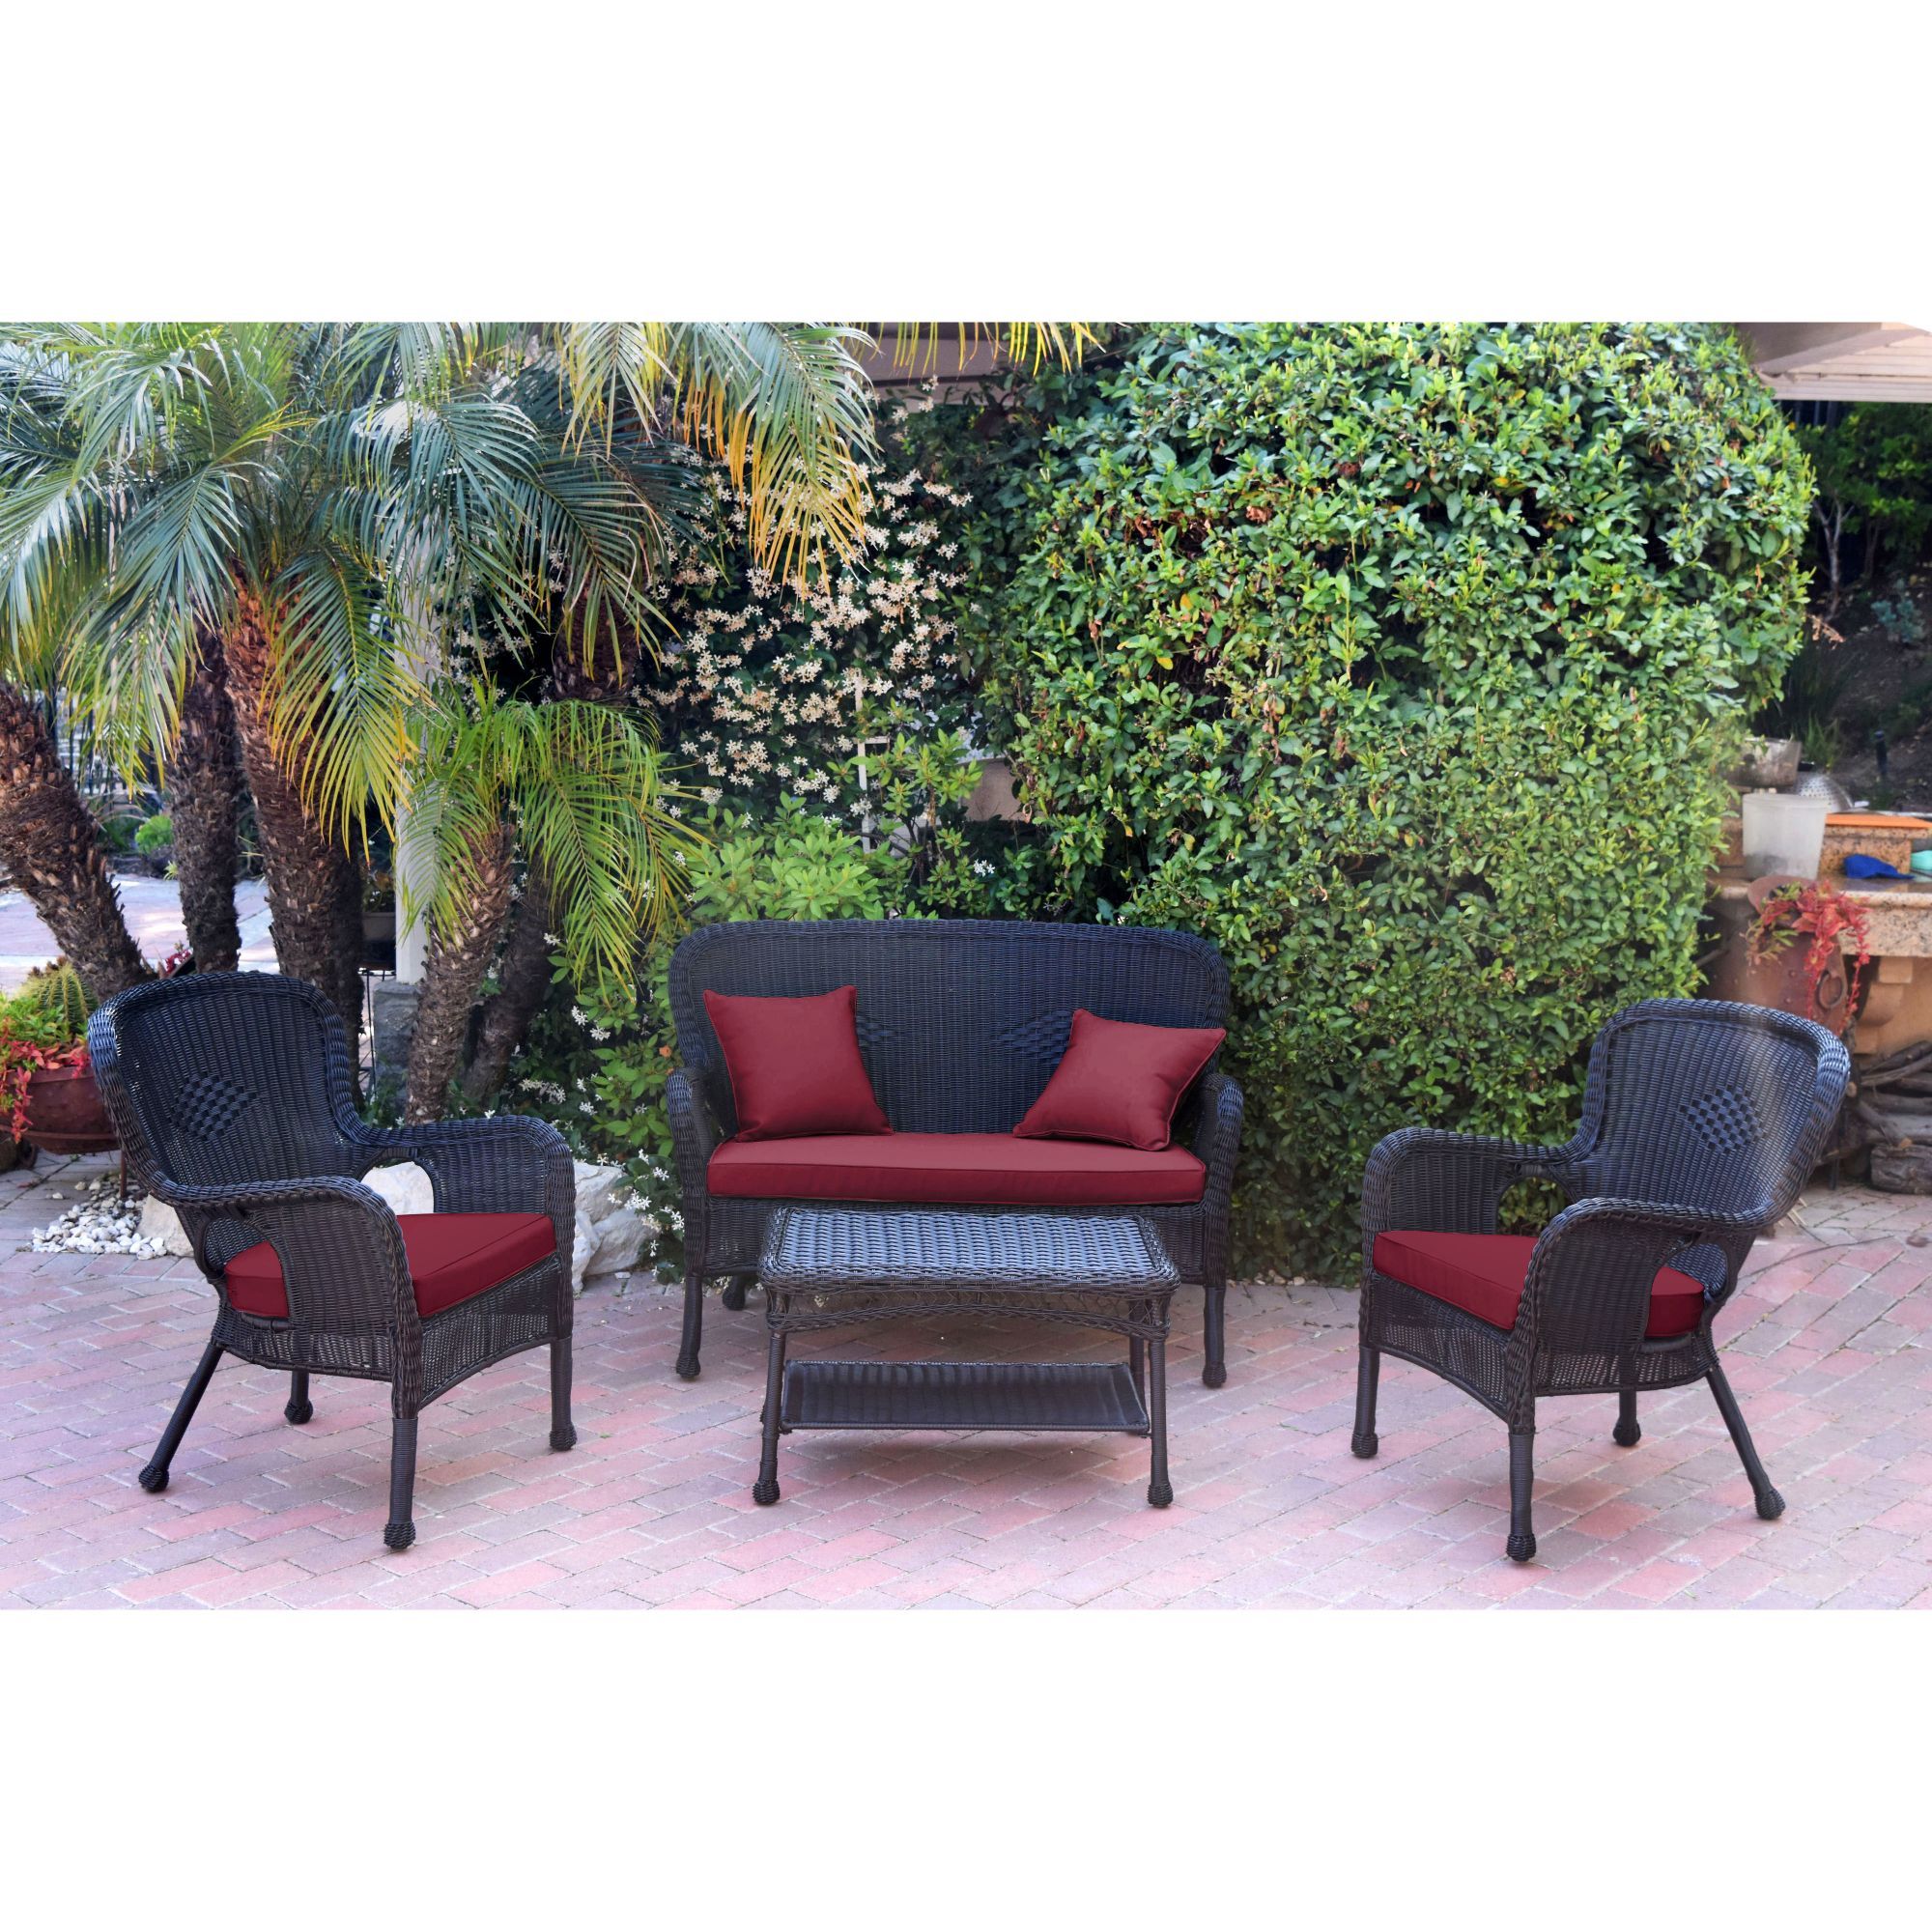 4 Piece Black Solid Wicker Outdoor Furniture Patio Conversation Set For Patio Conversation Sets And Cushions (View 7 of 15)